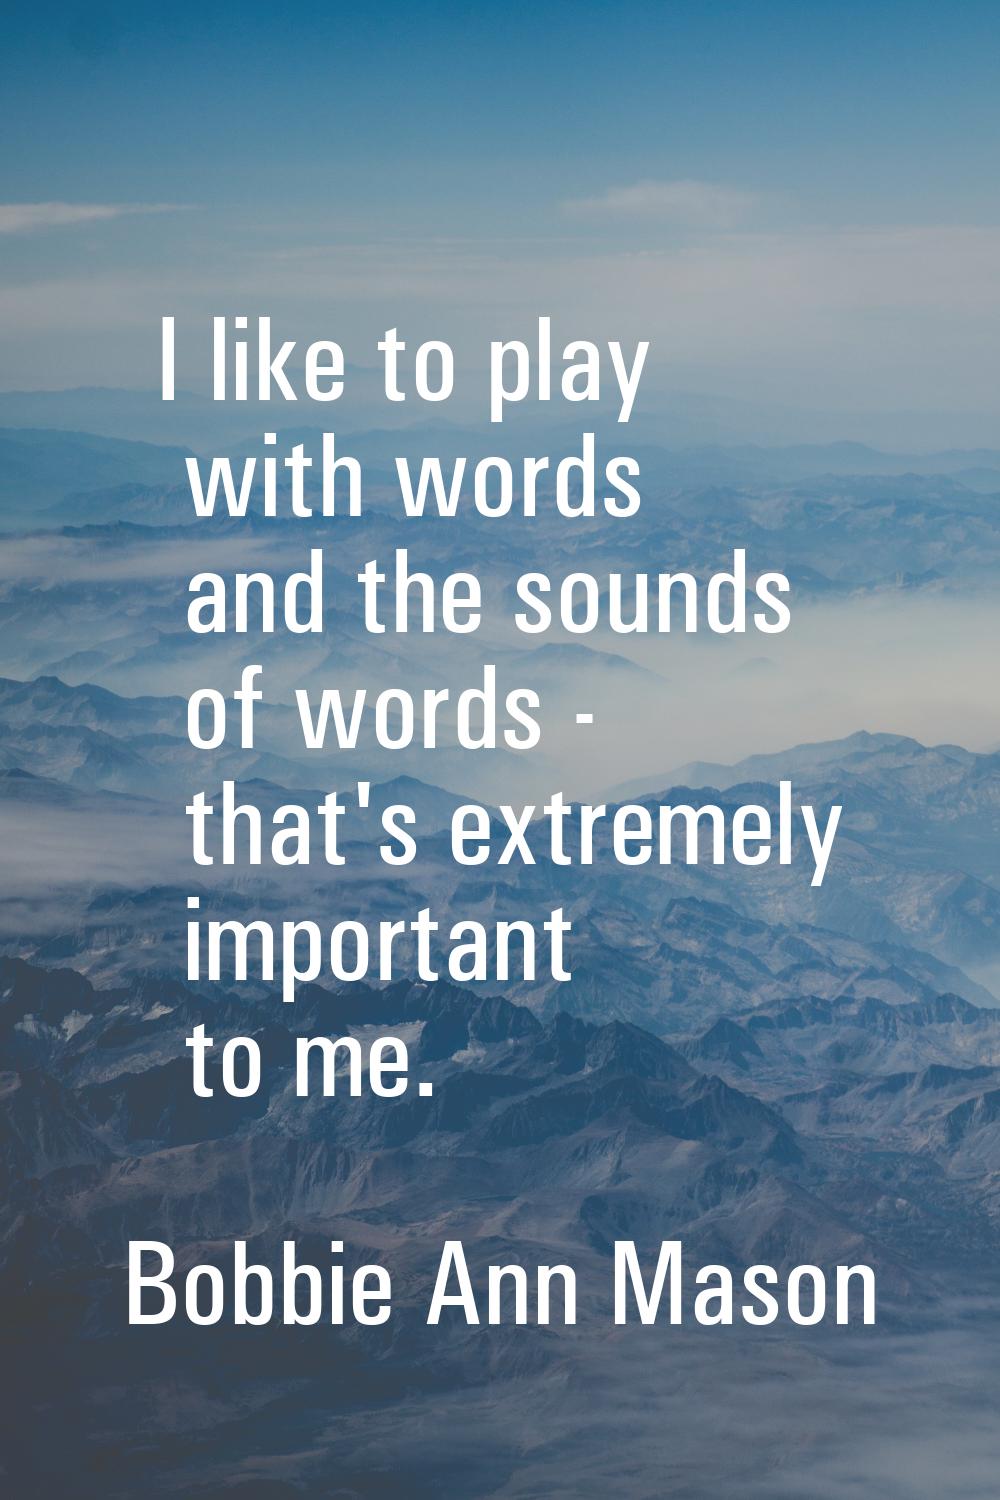 I like to play with words and the sounds of words - that's extremely important to me.